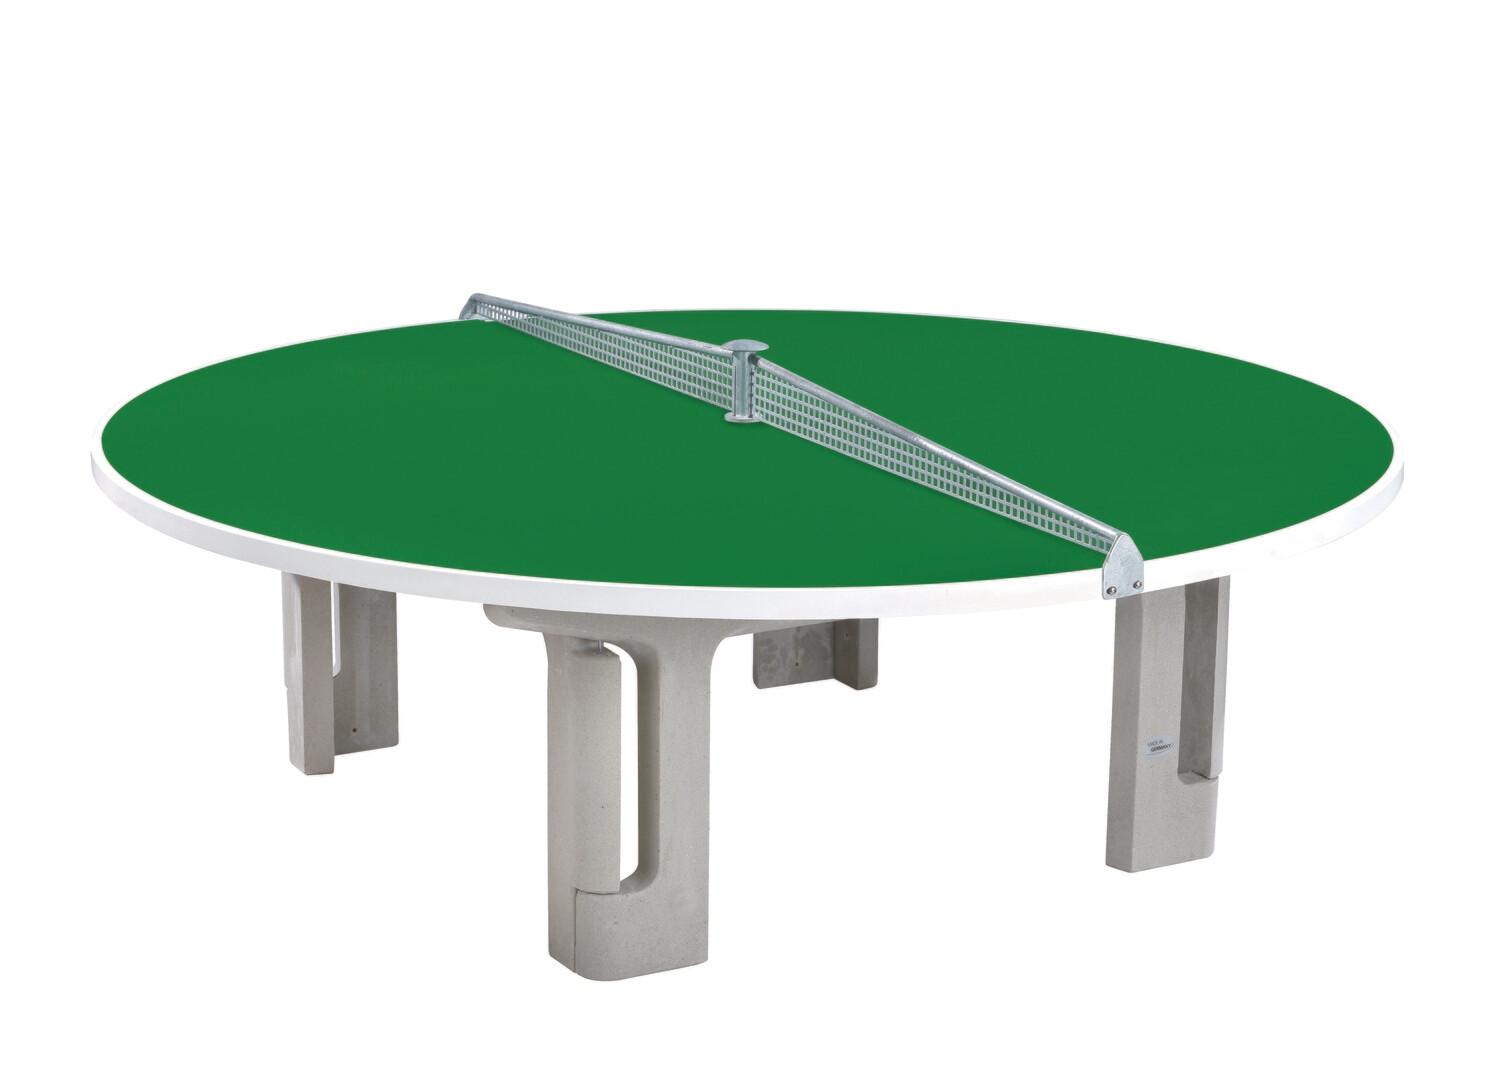 Butterfly R2000 Polymer Concrete Table Tennis table